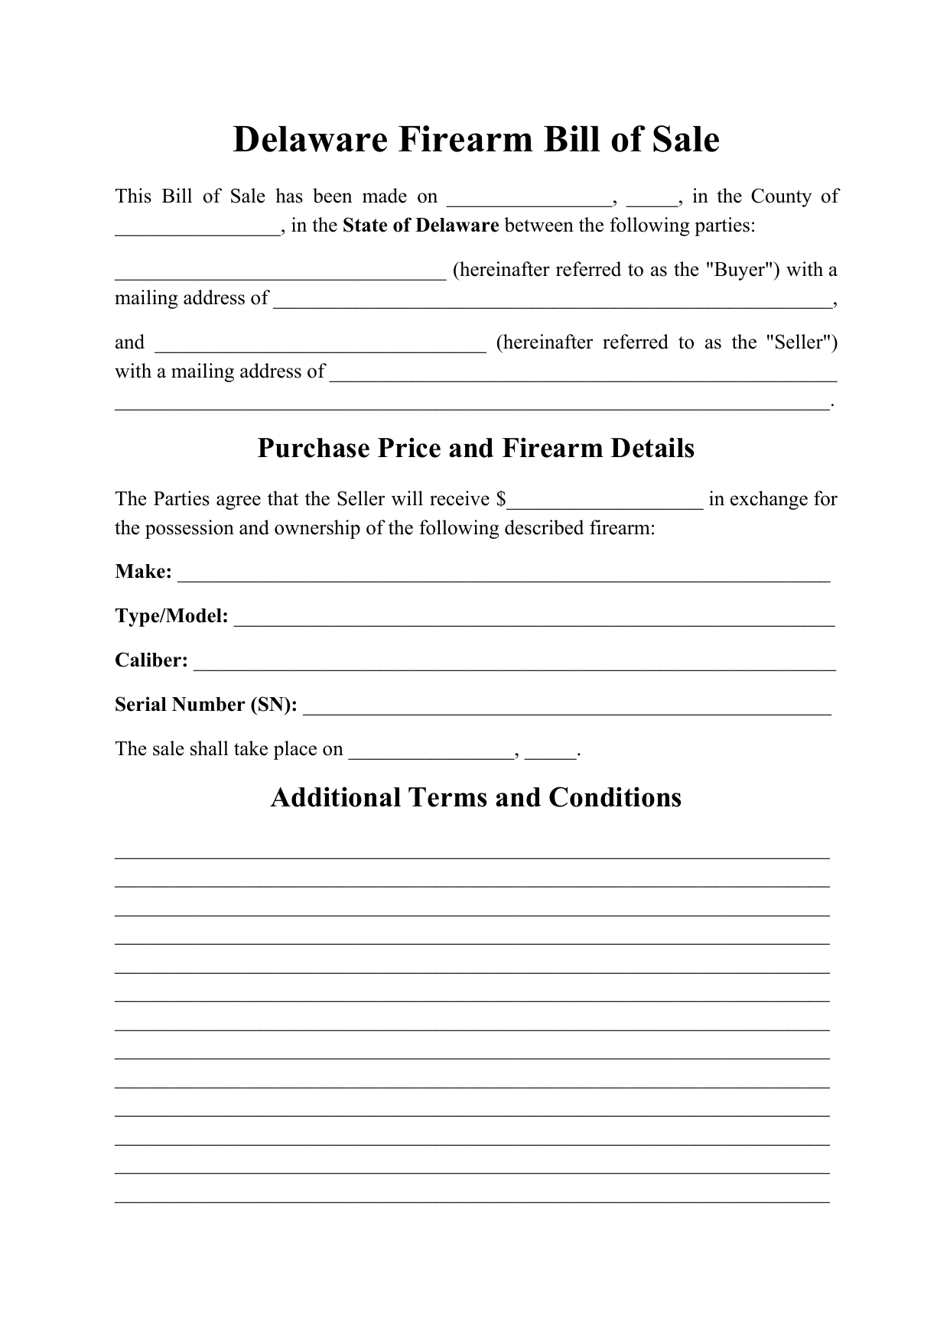 delaware-firearm-bill-of-sale-form-fill-out-sign-online-and-download